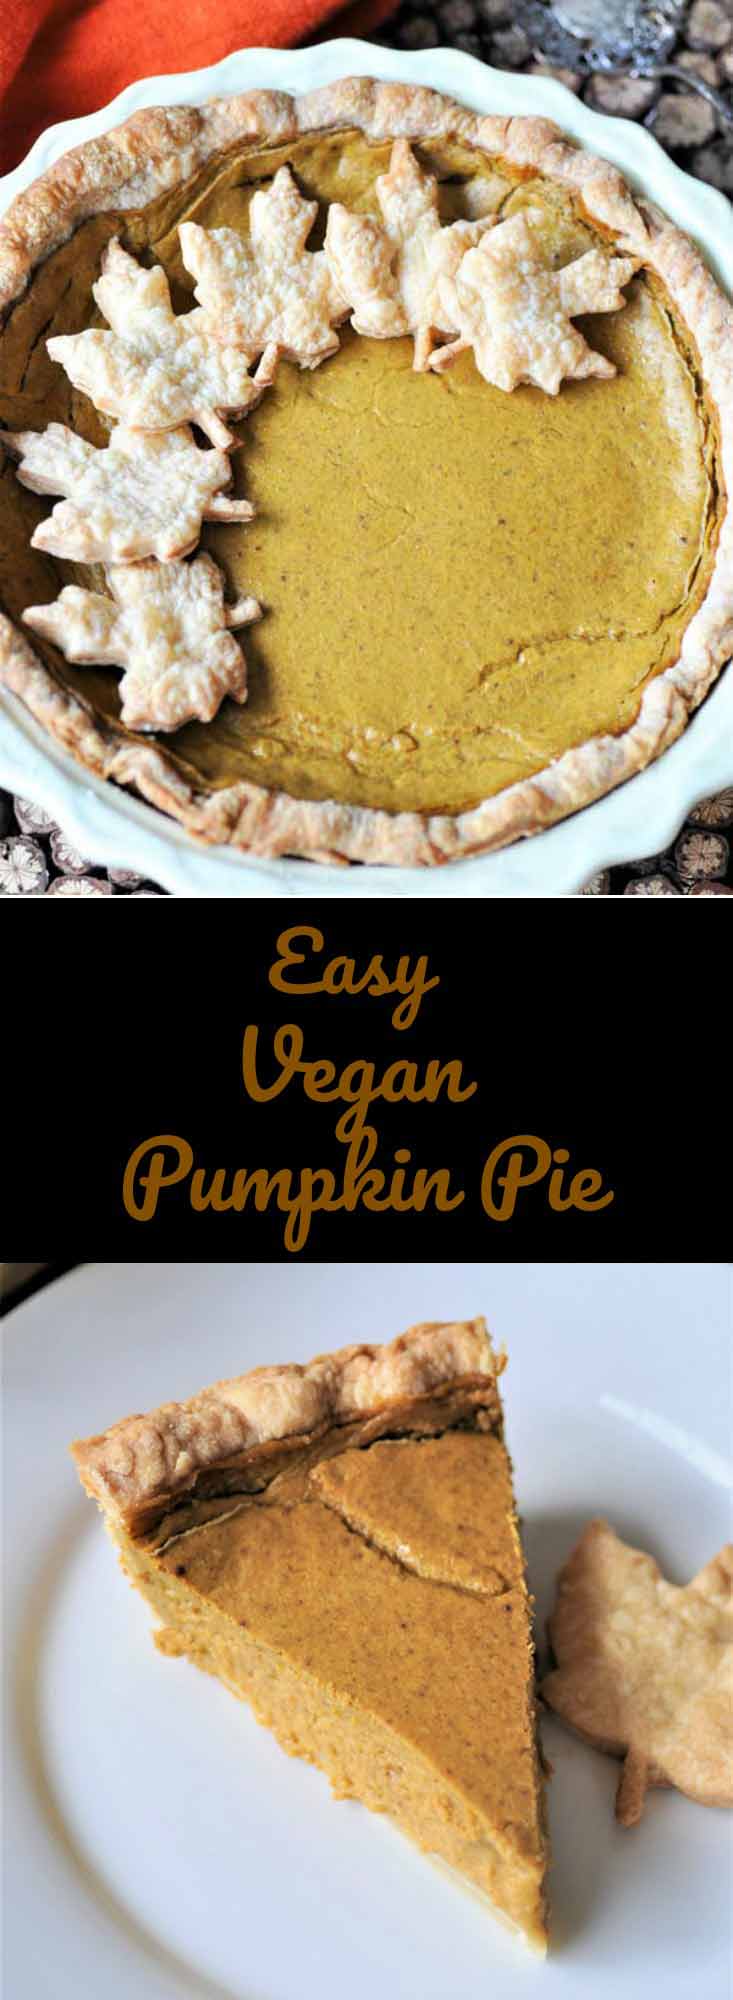 Easy vegan pumpkin pie! This is so easy to make and tastes like conventional pumpkin pie.